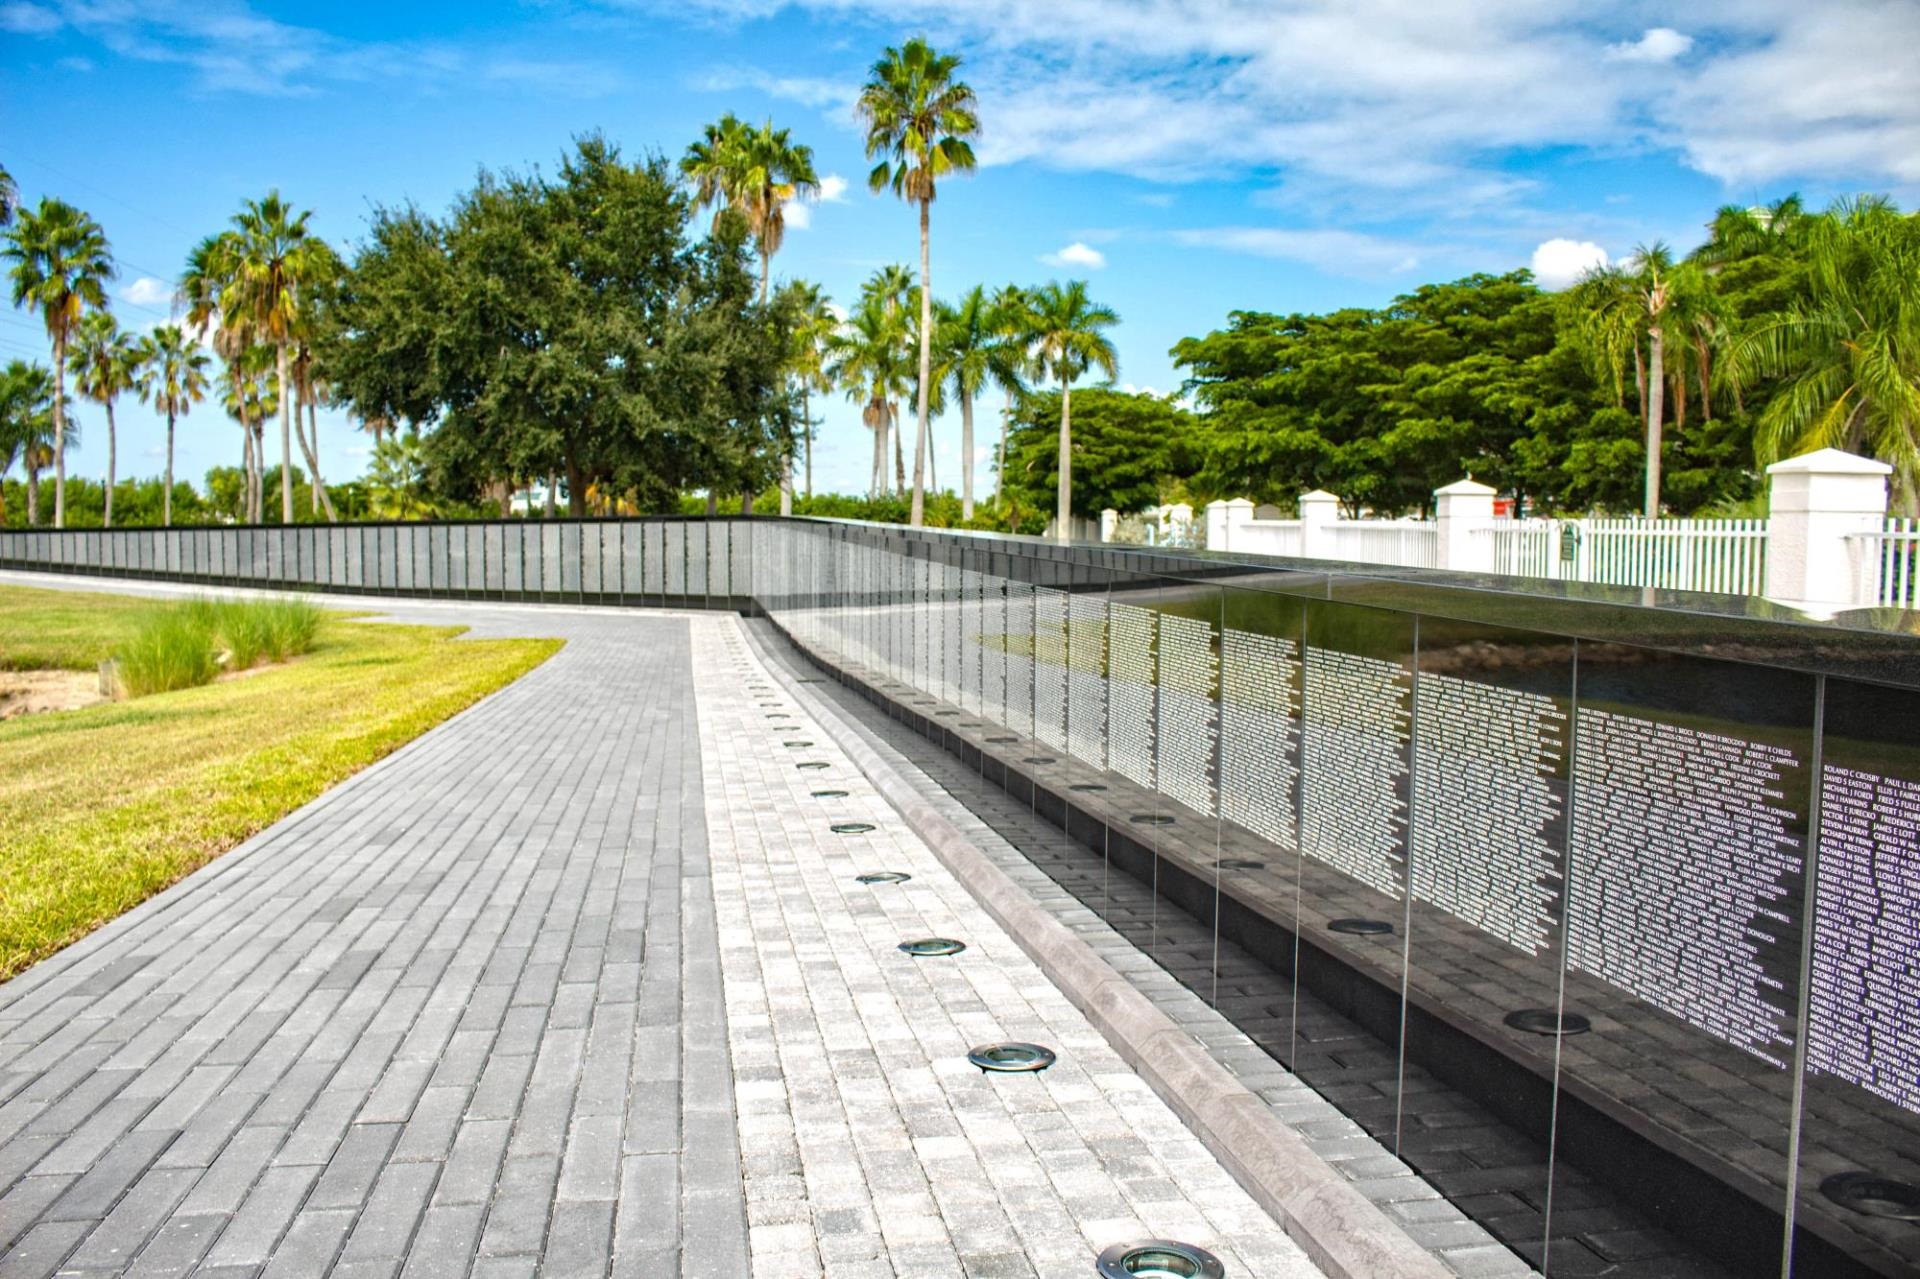 The Vietnam Wall of Southwest Florida